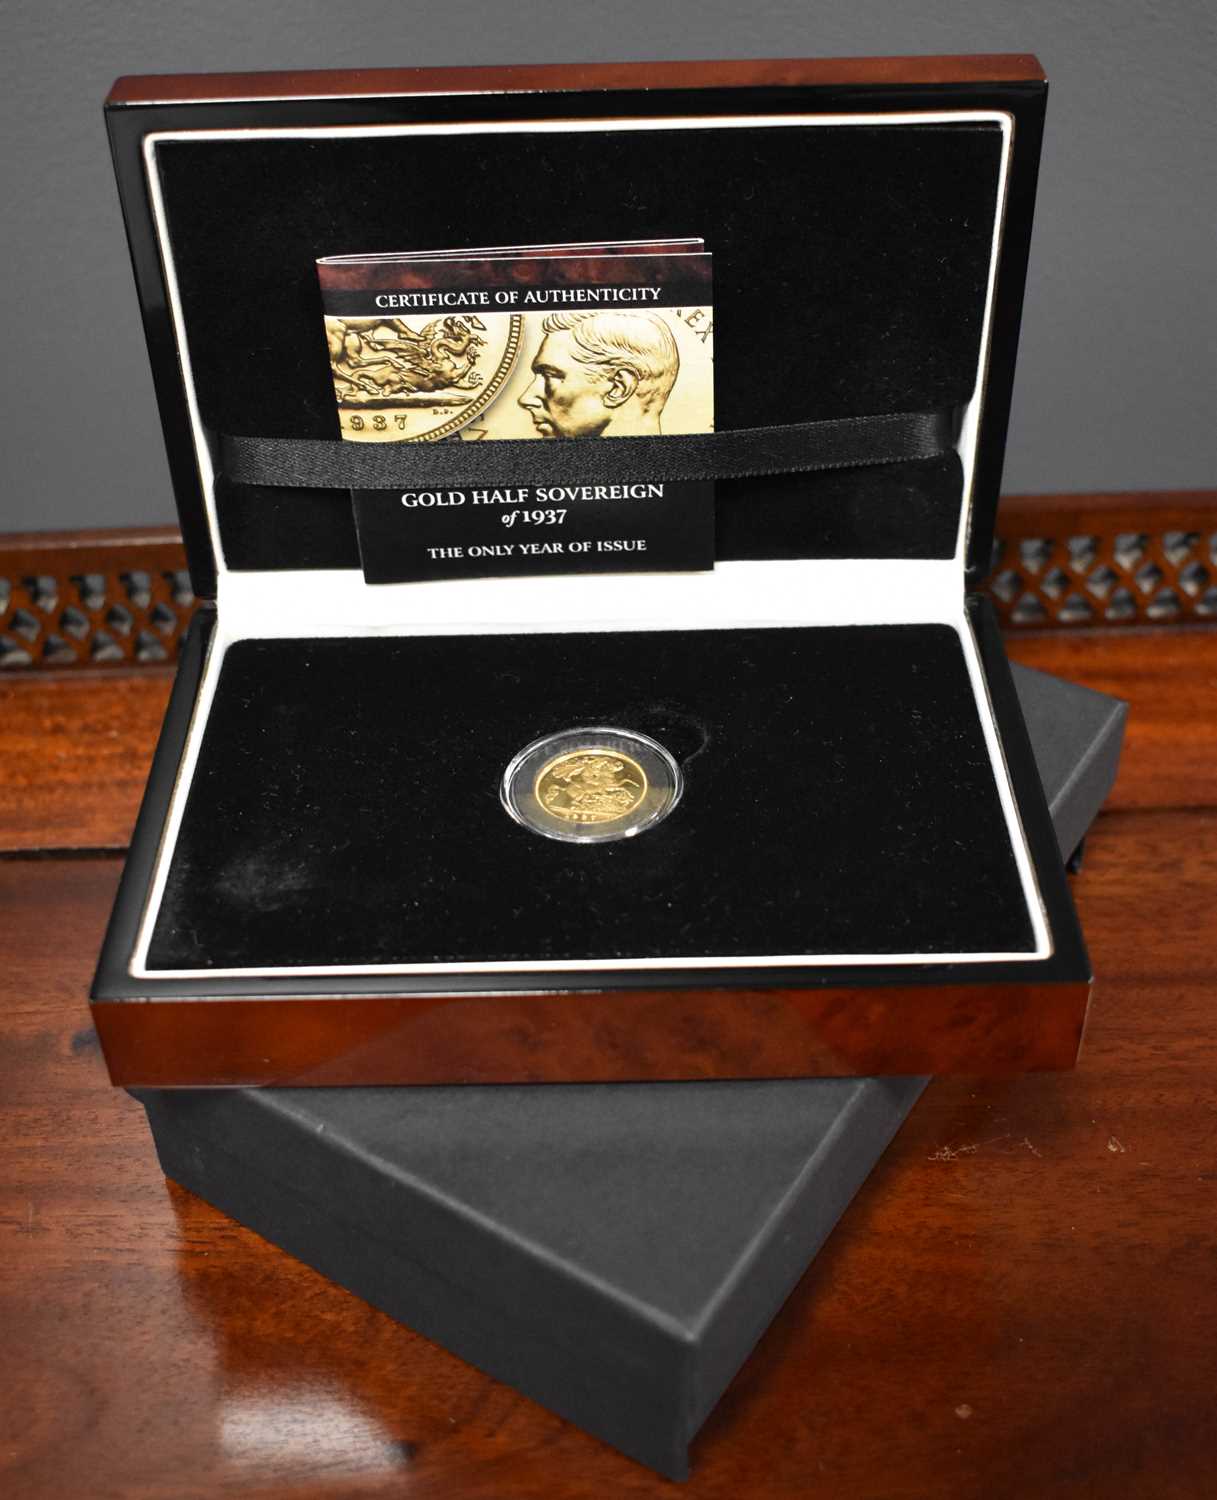 The King George VI Proof Quality Gold Half Sovereign of 1937 proof, The Only Year of Issue, with